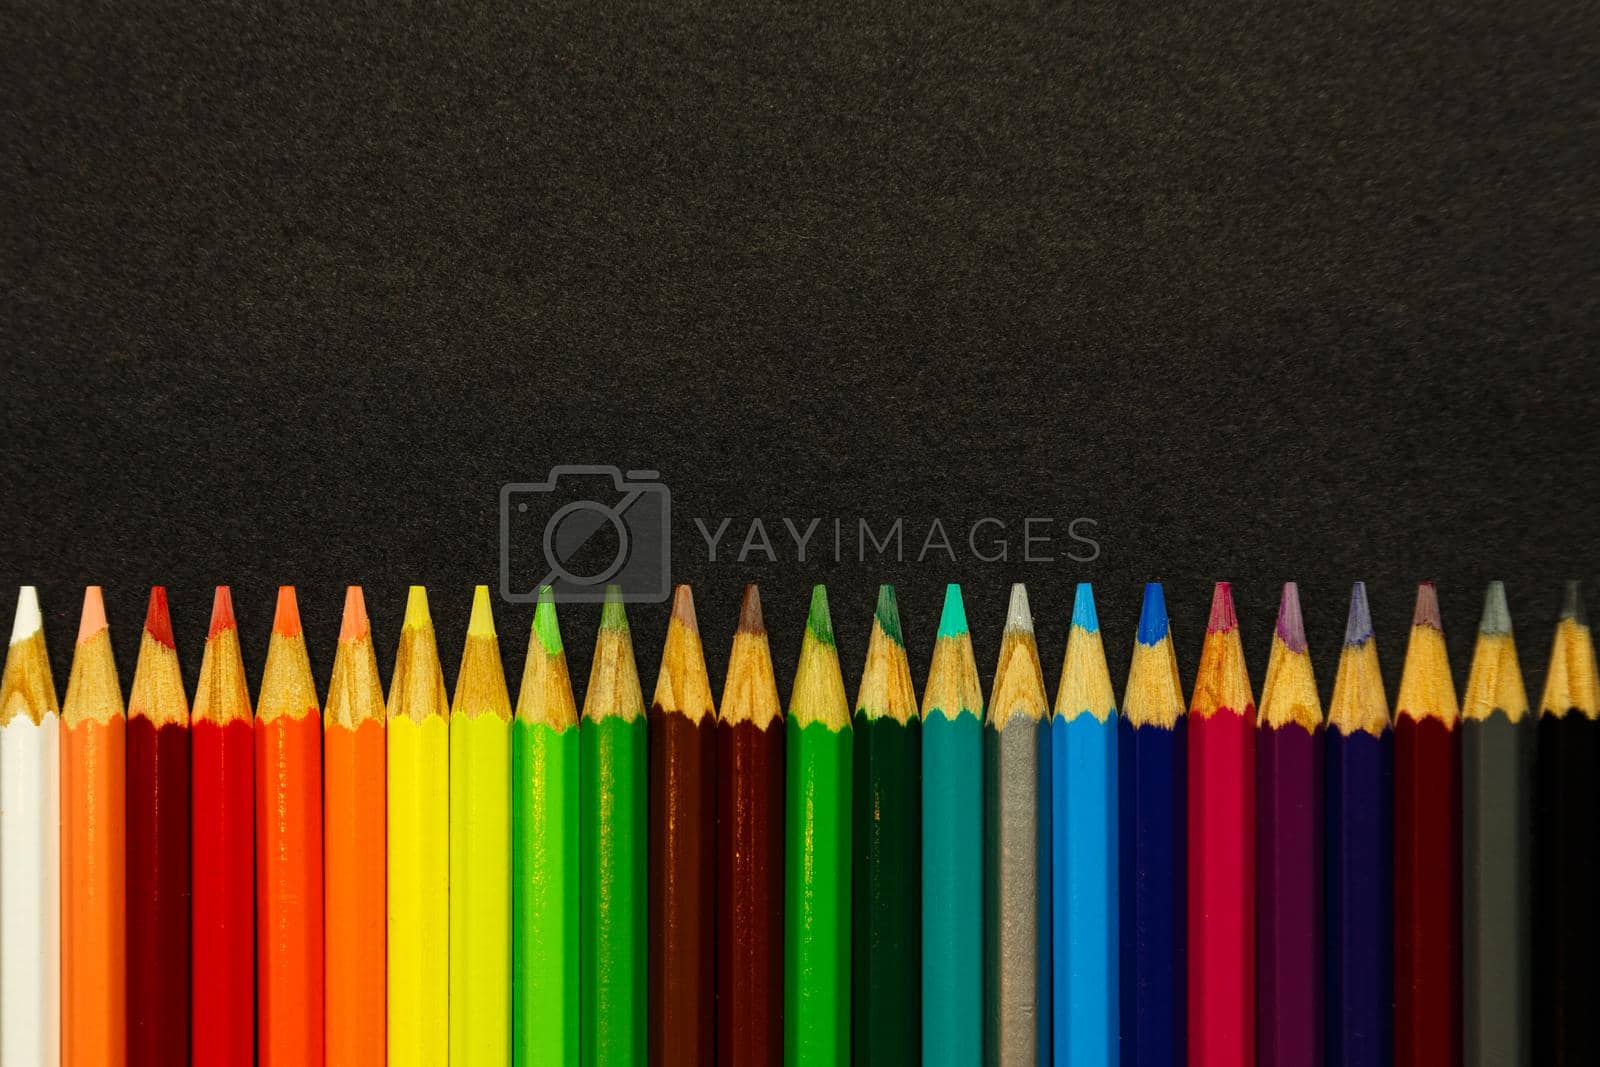 Royalty free image of A bunch of colorful pencils lined up over a dark background by AveCalvar